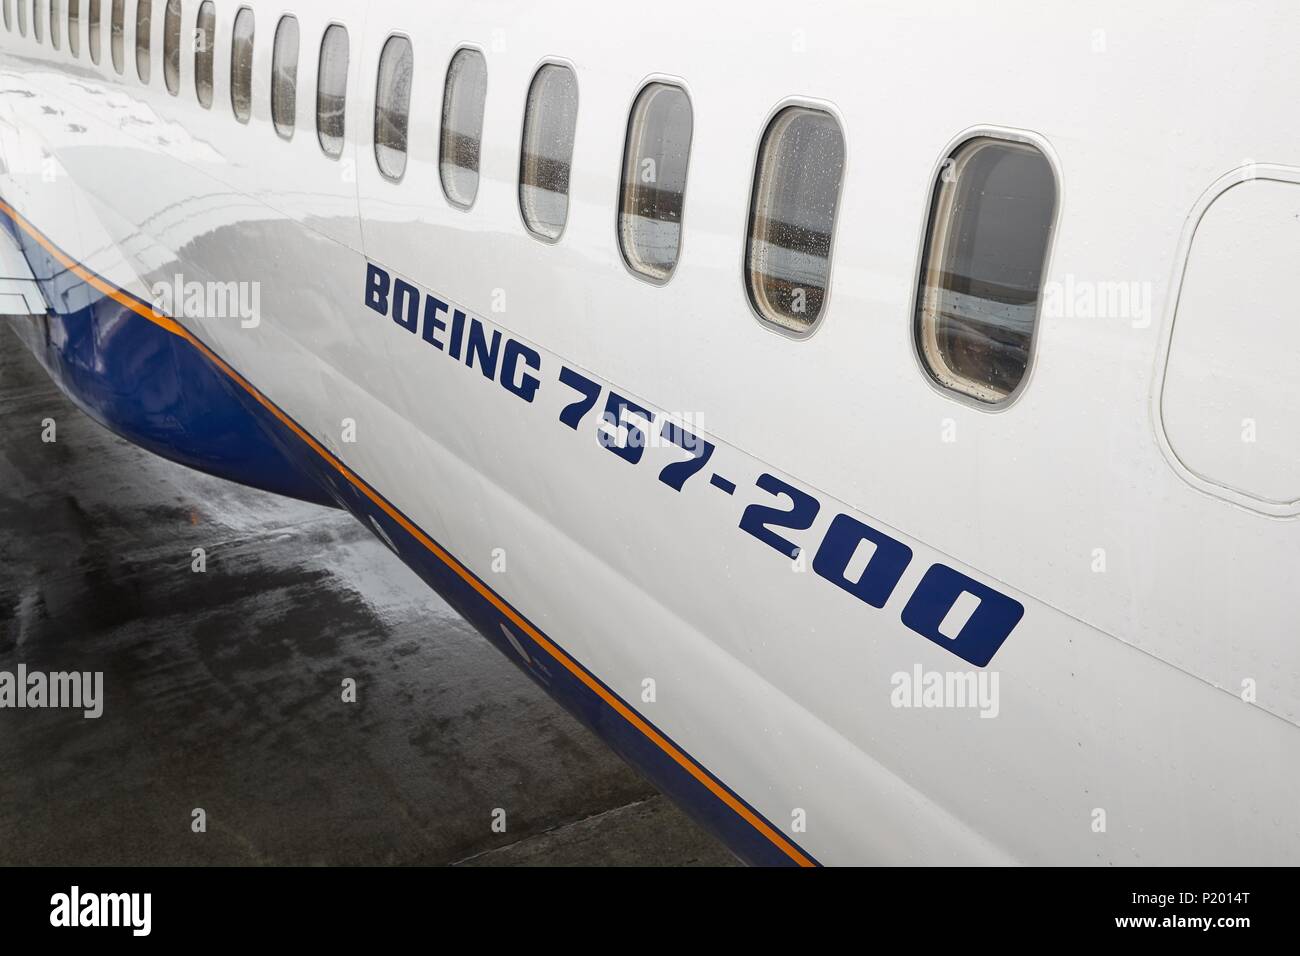 Boeing 757 Jet Airliner Stock Photo